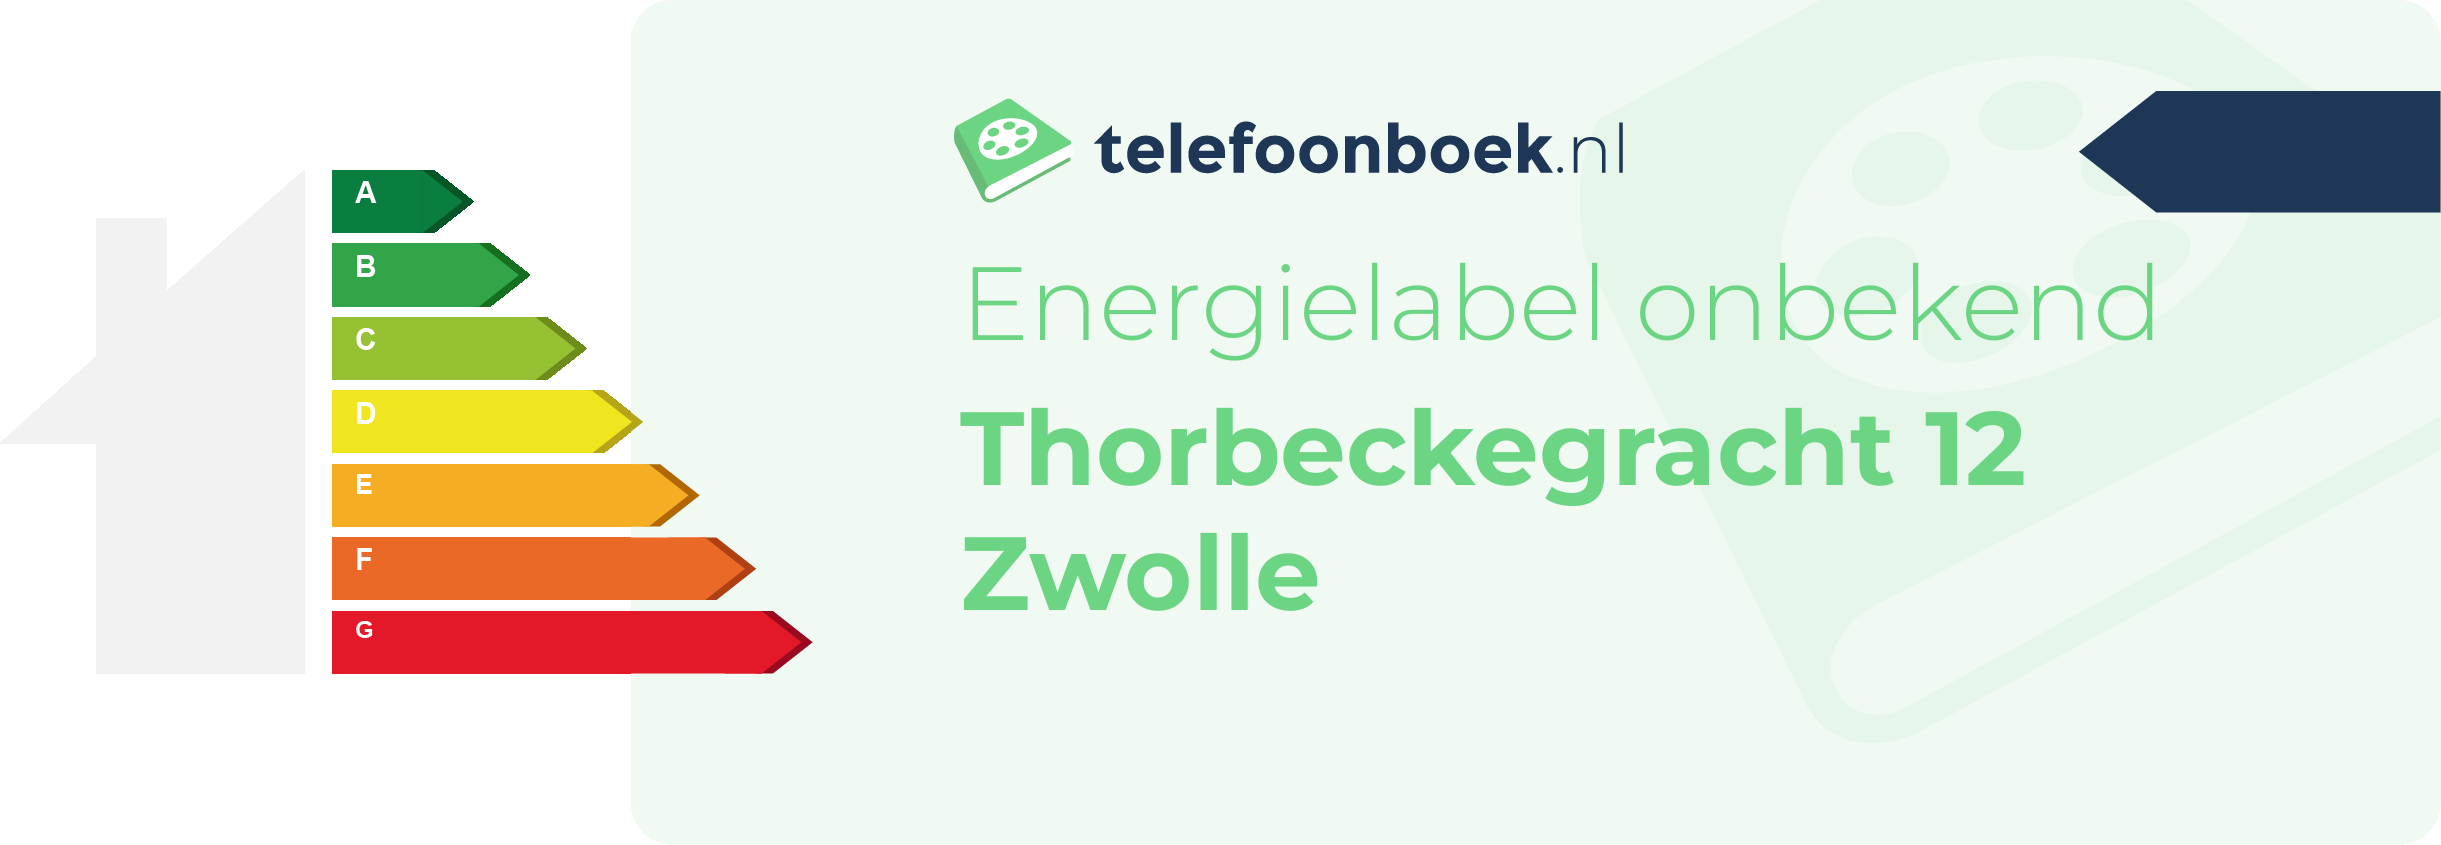 Energielabel Thorbeckegracht 12 Zwolle